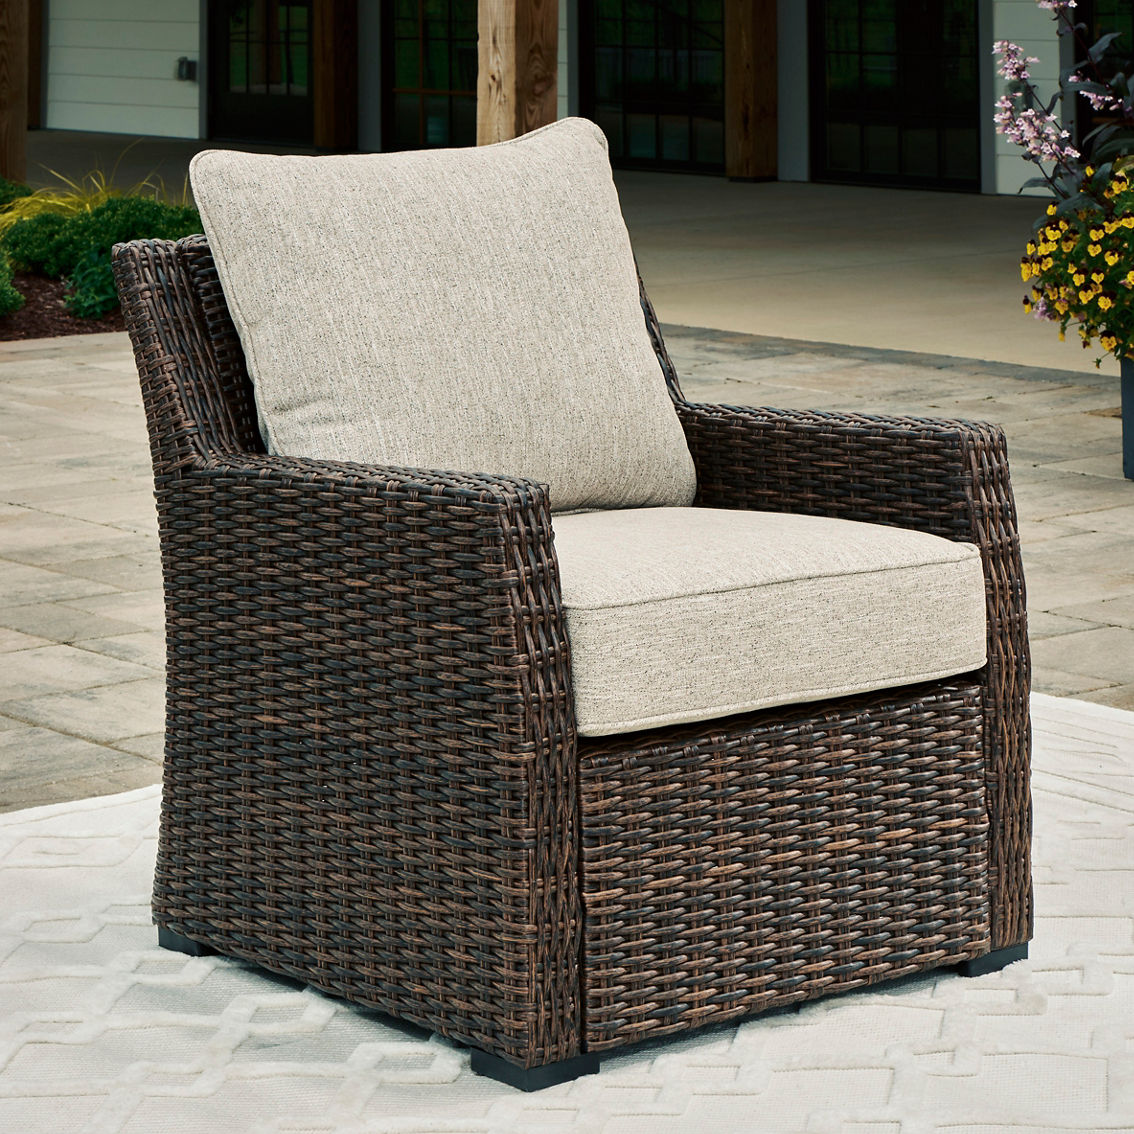 Signature Design by Ashley Brook Ranch 2 pc. Outdoor Sectional Set - Image 3 of 3